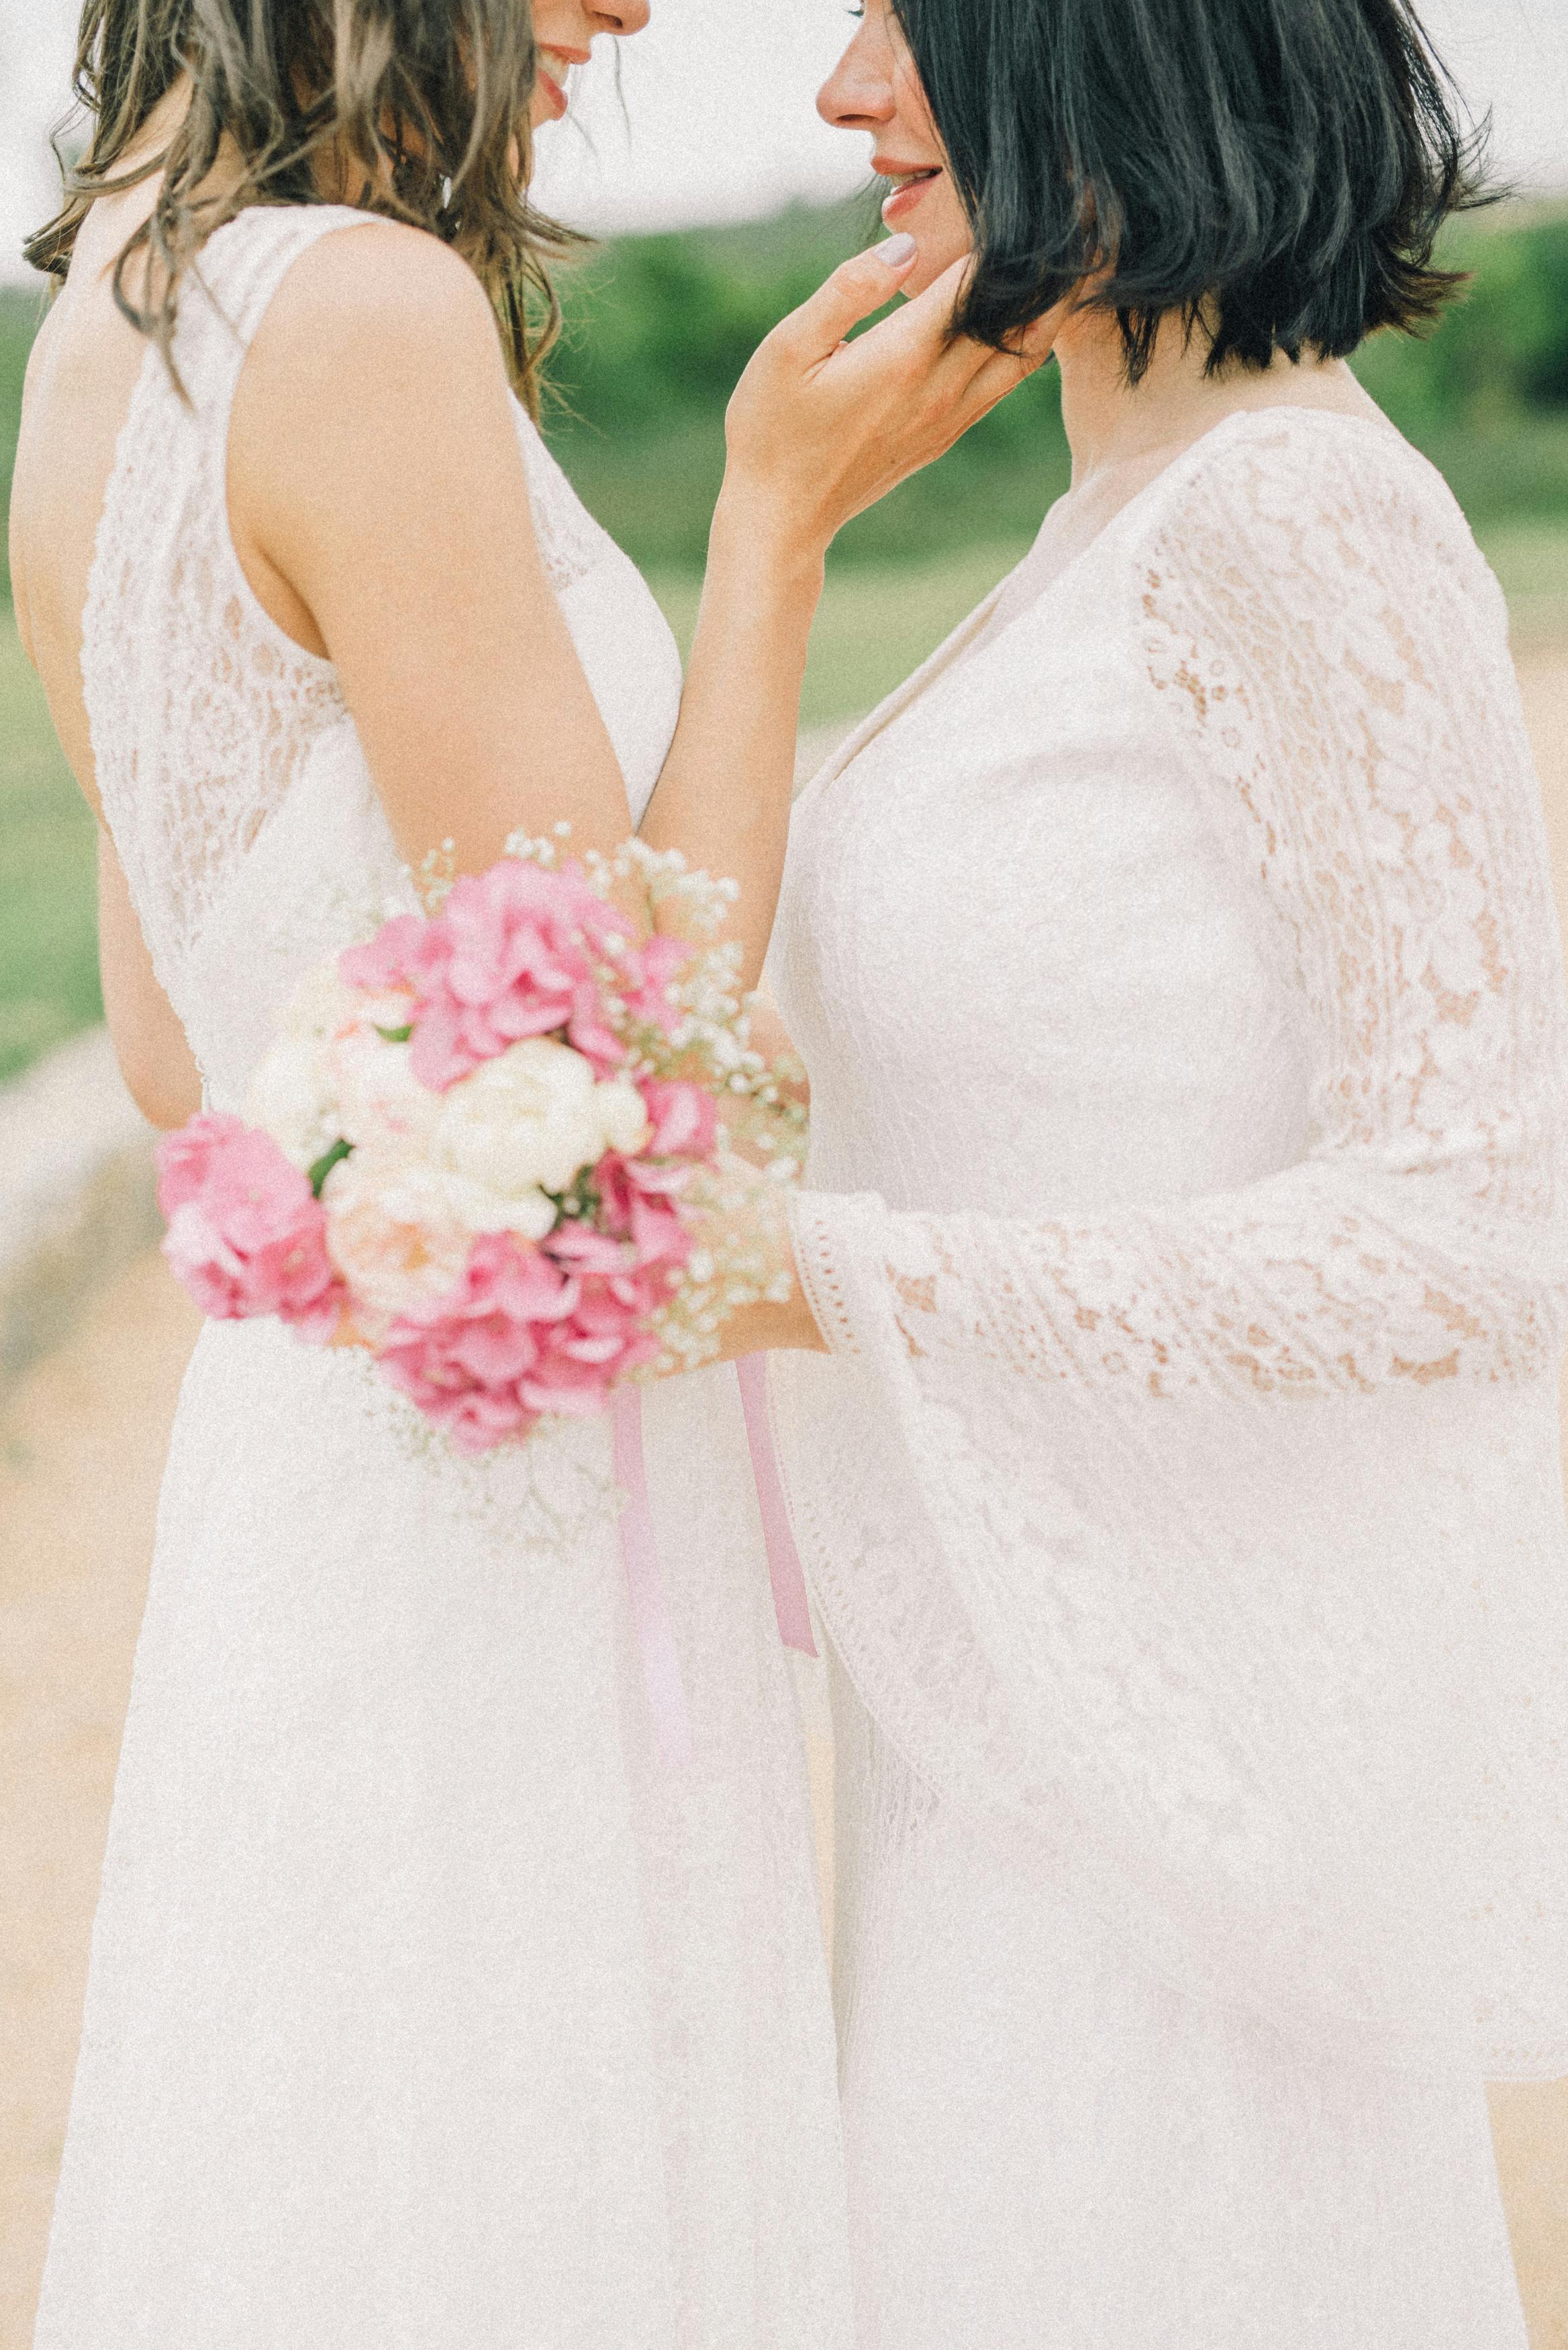 photo of women in white wedding dress looking at each other